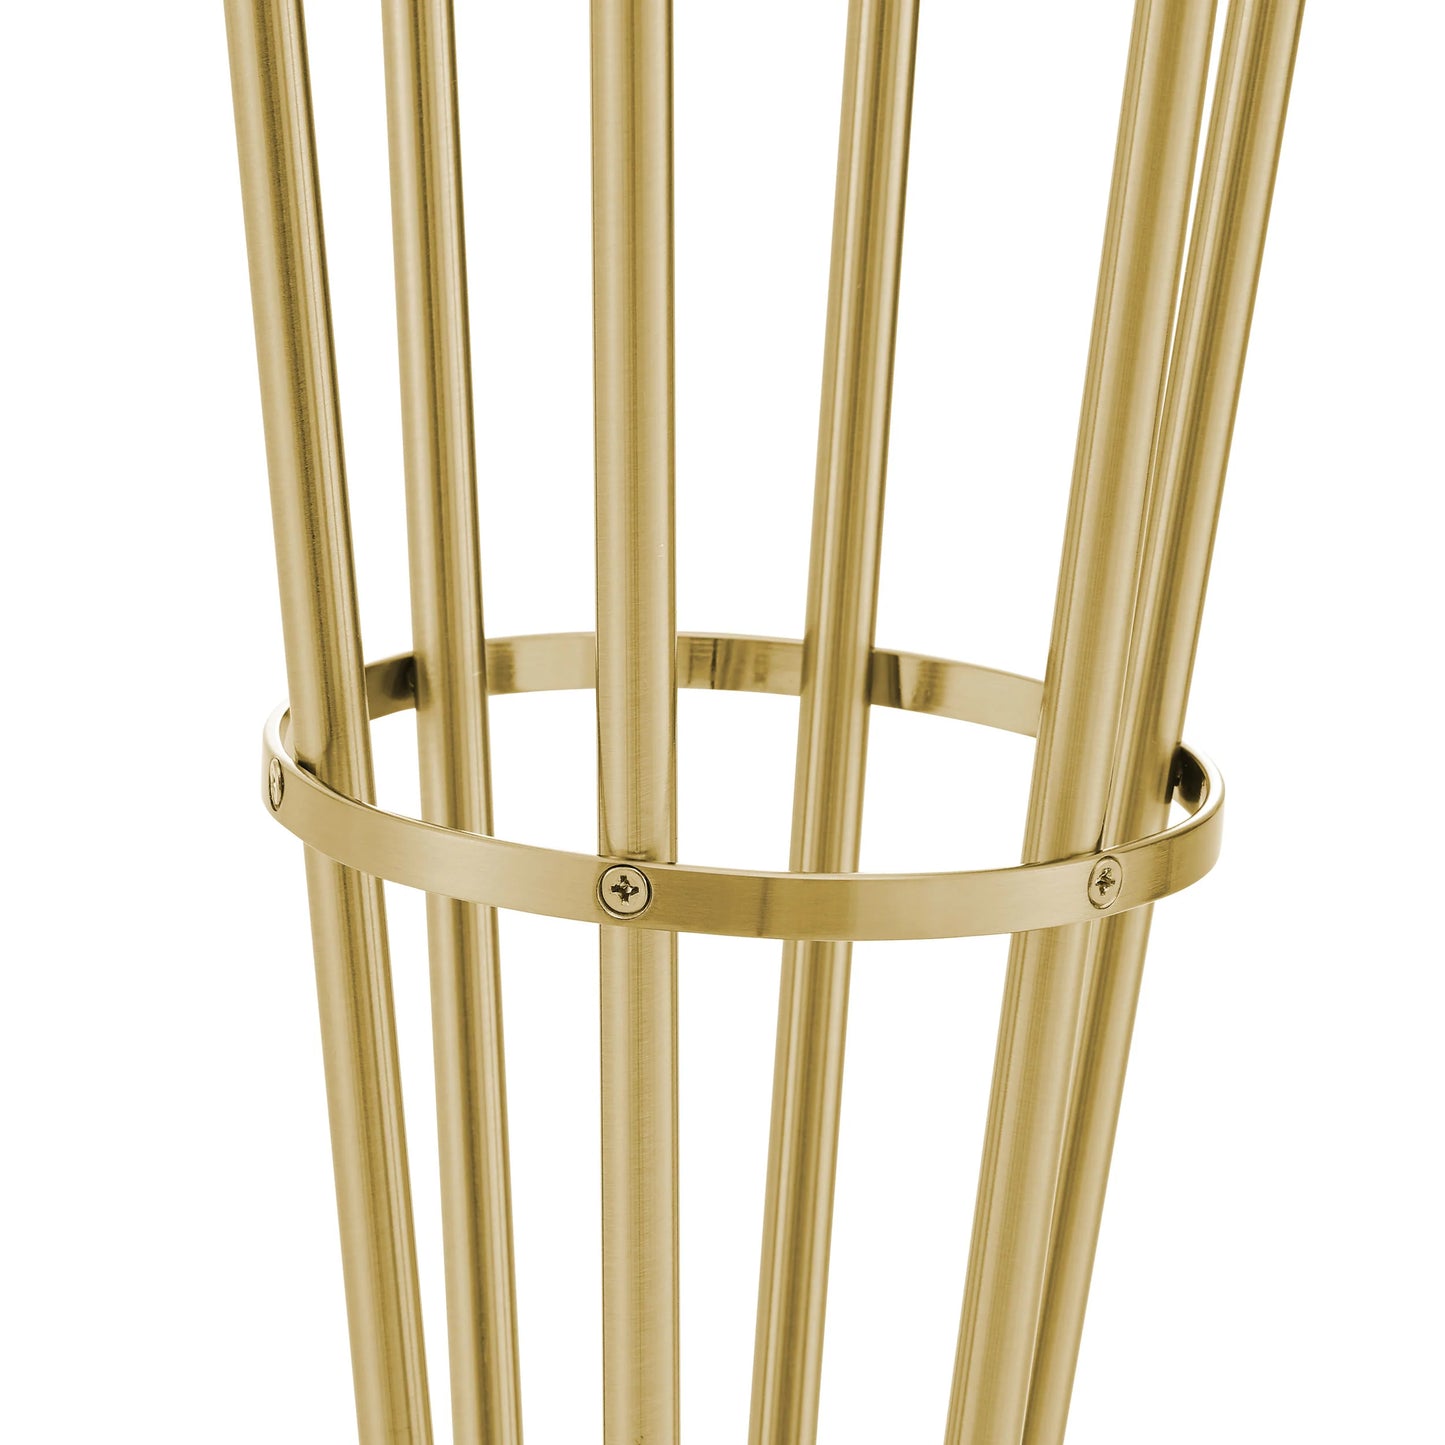 Finesse Decor Anechdoche 6 Lights Gold and White Floor Lamp 4